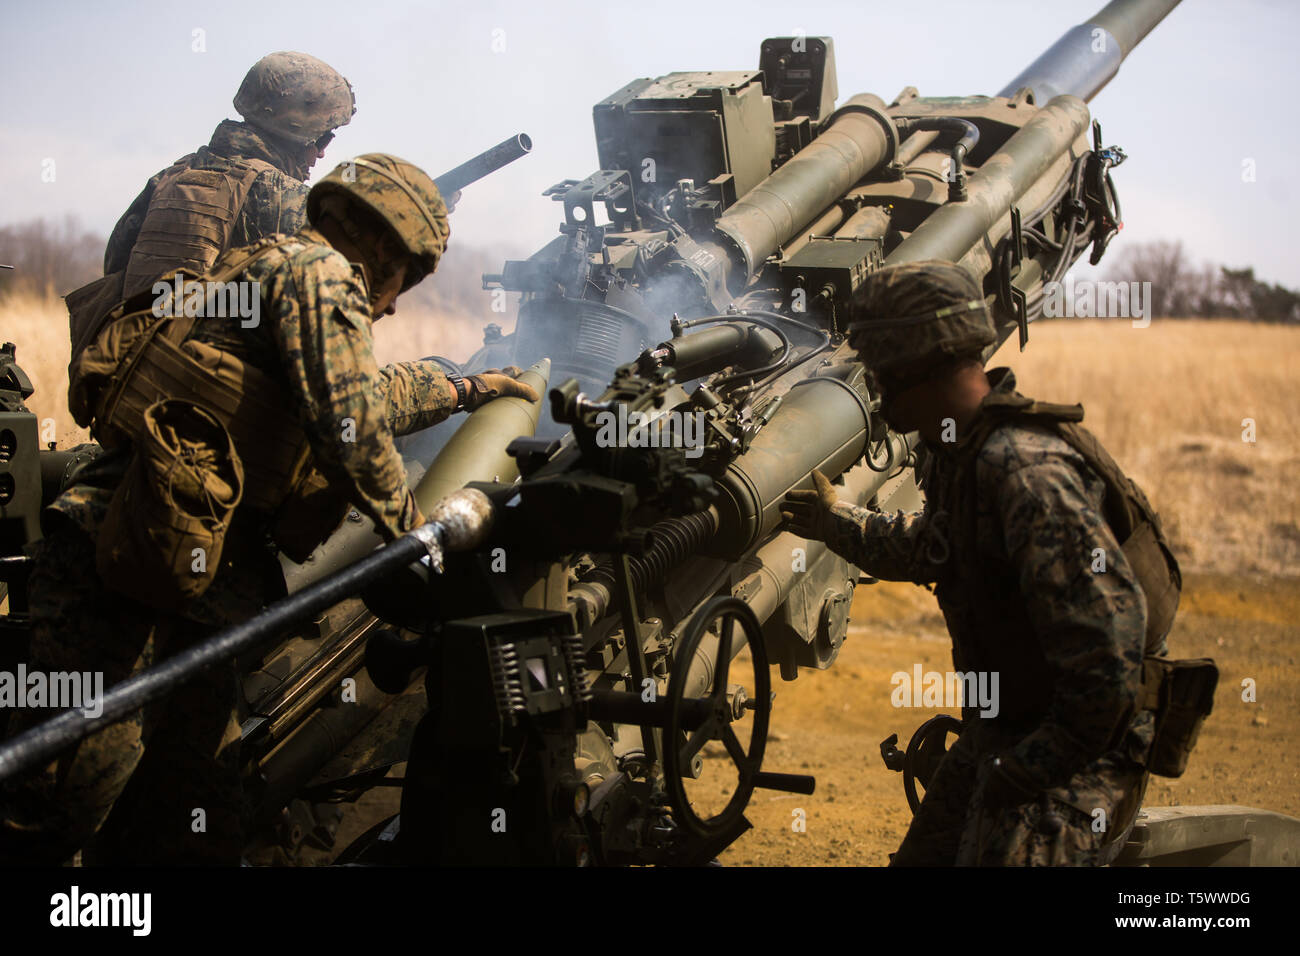 U.S. Marines with 3rd Battalion, 12th Marine Regiment, 3rd Marine Division, load a 155mm artillery round into an M777 Howitzer during the Artillery Relocation Training Program 19-1 at the Combined Arms Training Center, Camp Fuji, April 20, 2019. ARTP provides 3rd Battalion, 12th Marine Regiment with essential, live fire training outside of Okinawa to increase their warfighting capabilities and support the U.S. - Japan Treaty of Mutual Cooperation and Security. (U.S. Marine Corps photo by Cpl. Josue Marquez) Stock Photo